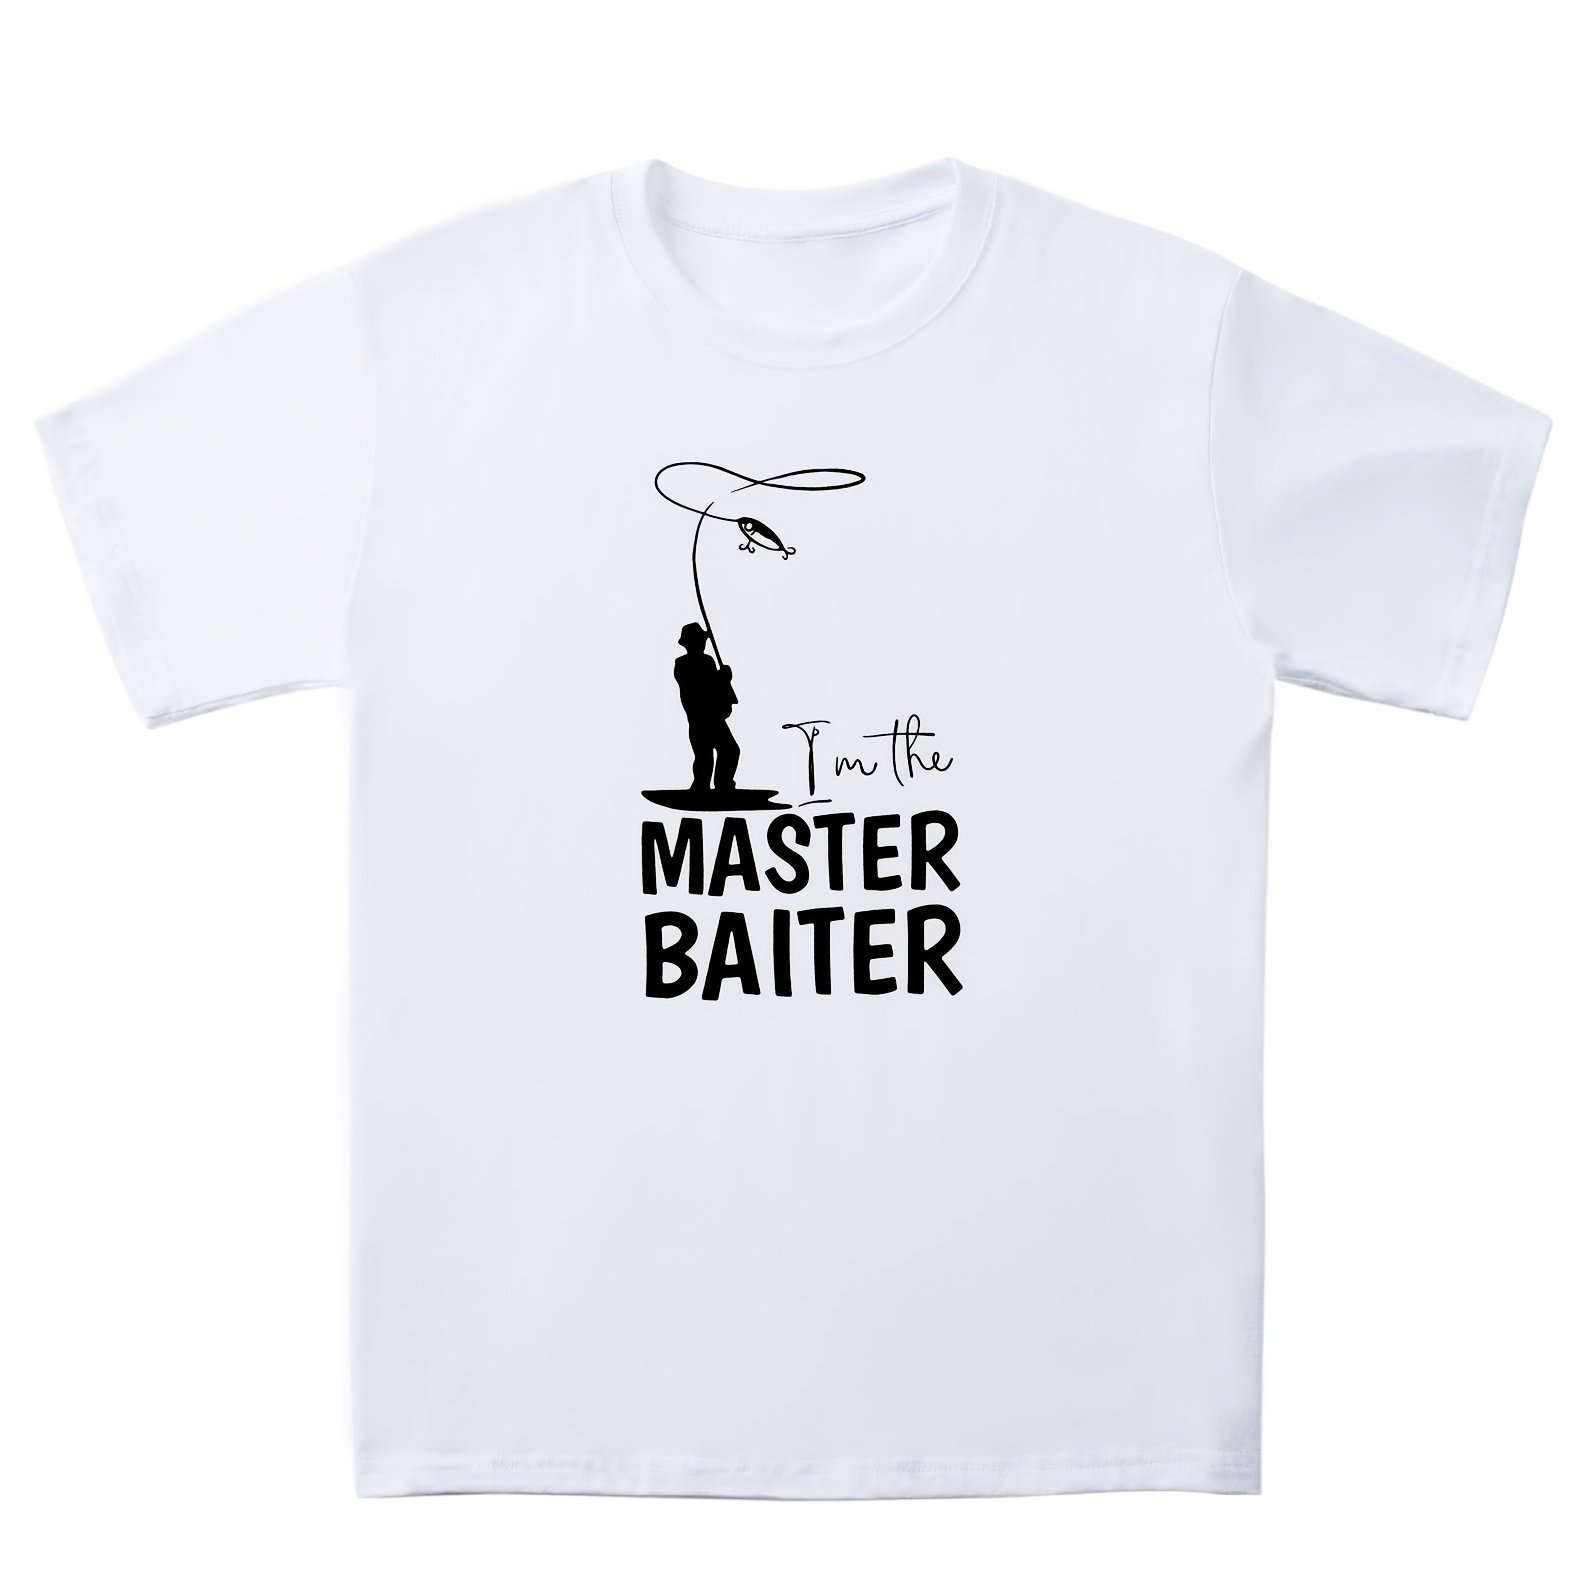 Men's Casual Loose T-Shirts MASTER BAITER Print Round Neck Short Sleeve  Tees Top Summer Clothes